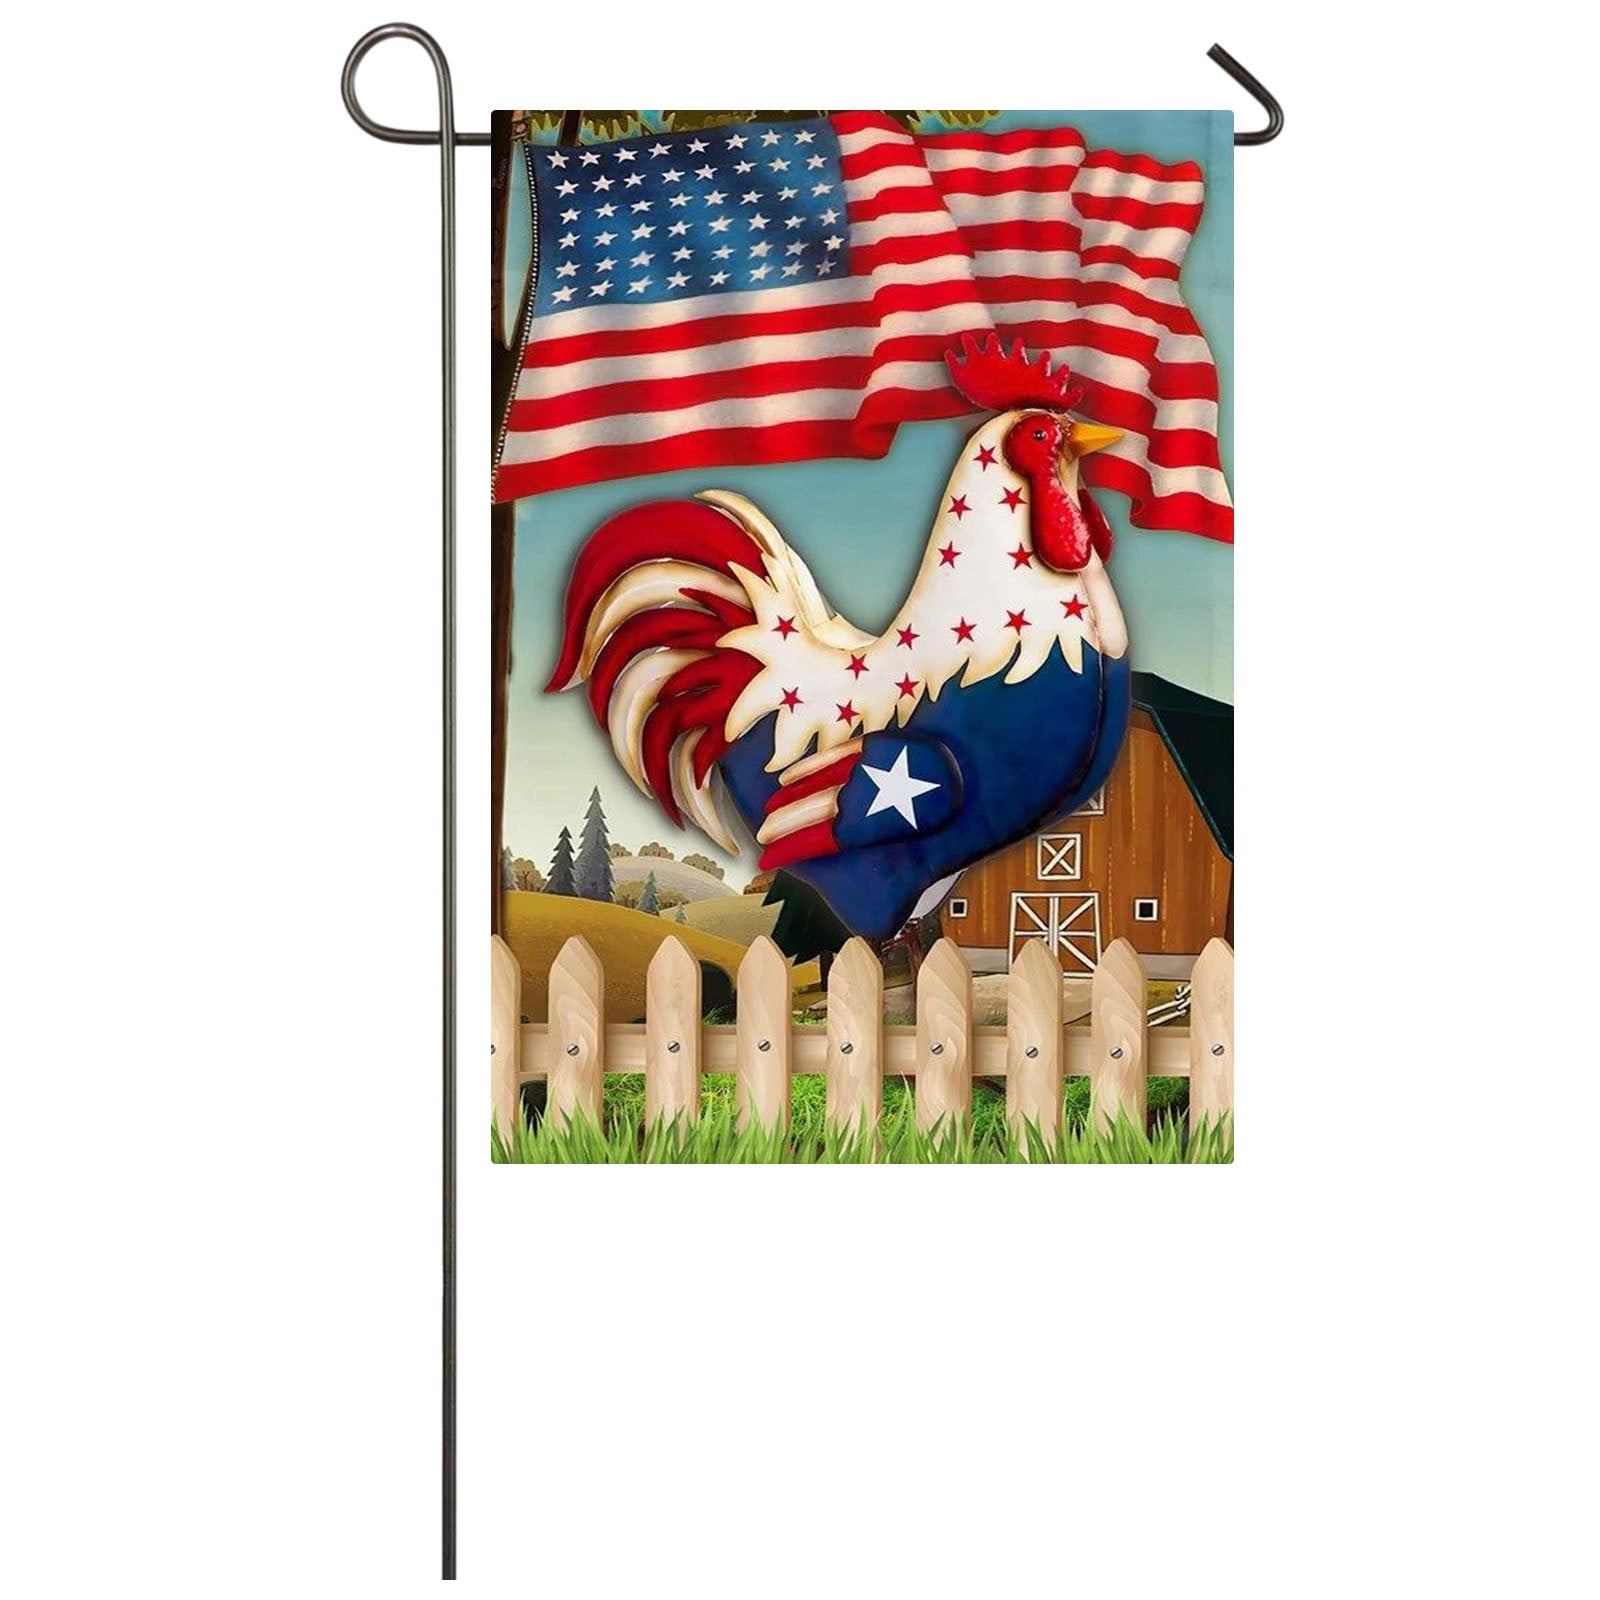 United States Navy12.5 X 18 GARDEN FLAG 12"X18" Yard  BANNER OUTDOOR RATED 